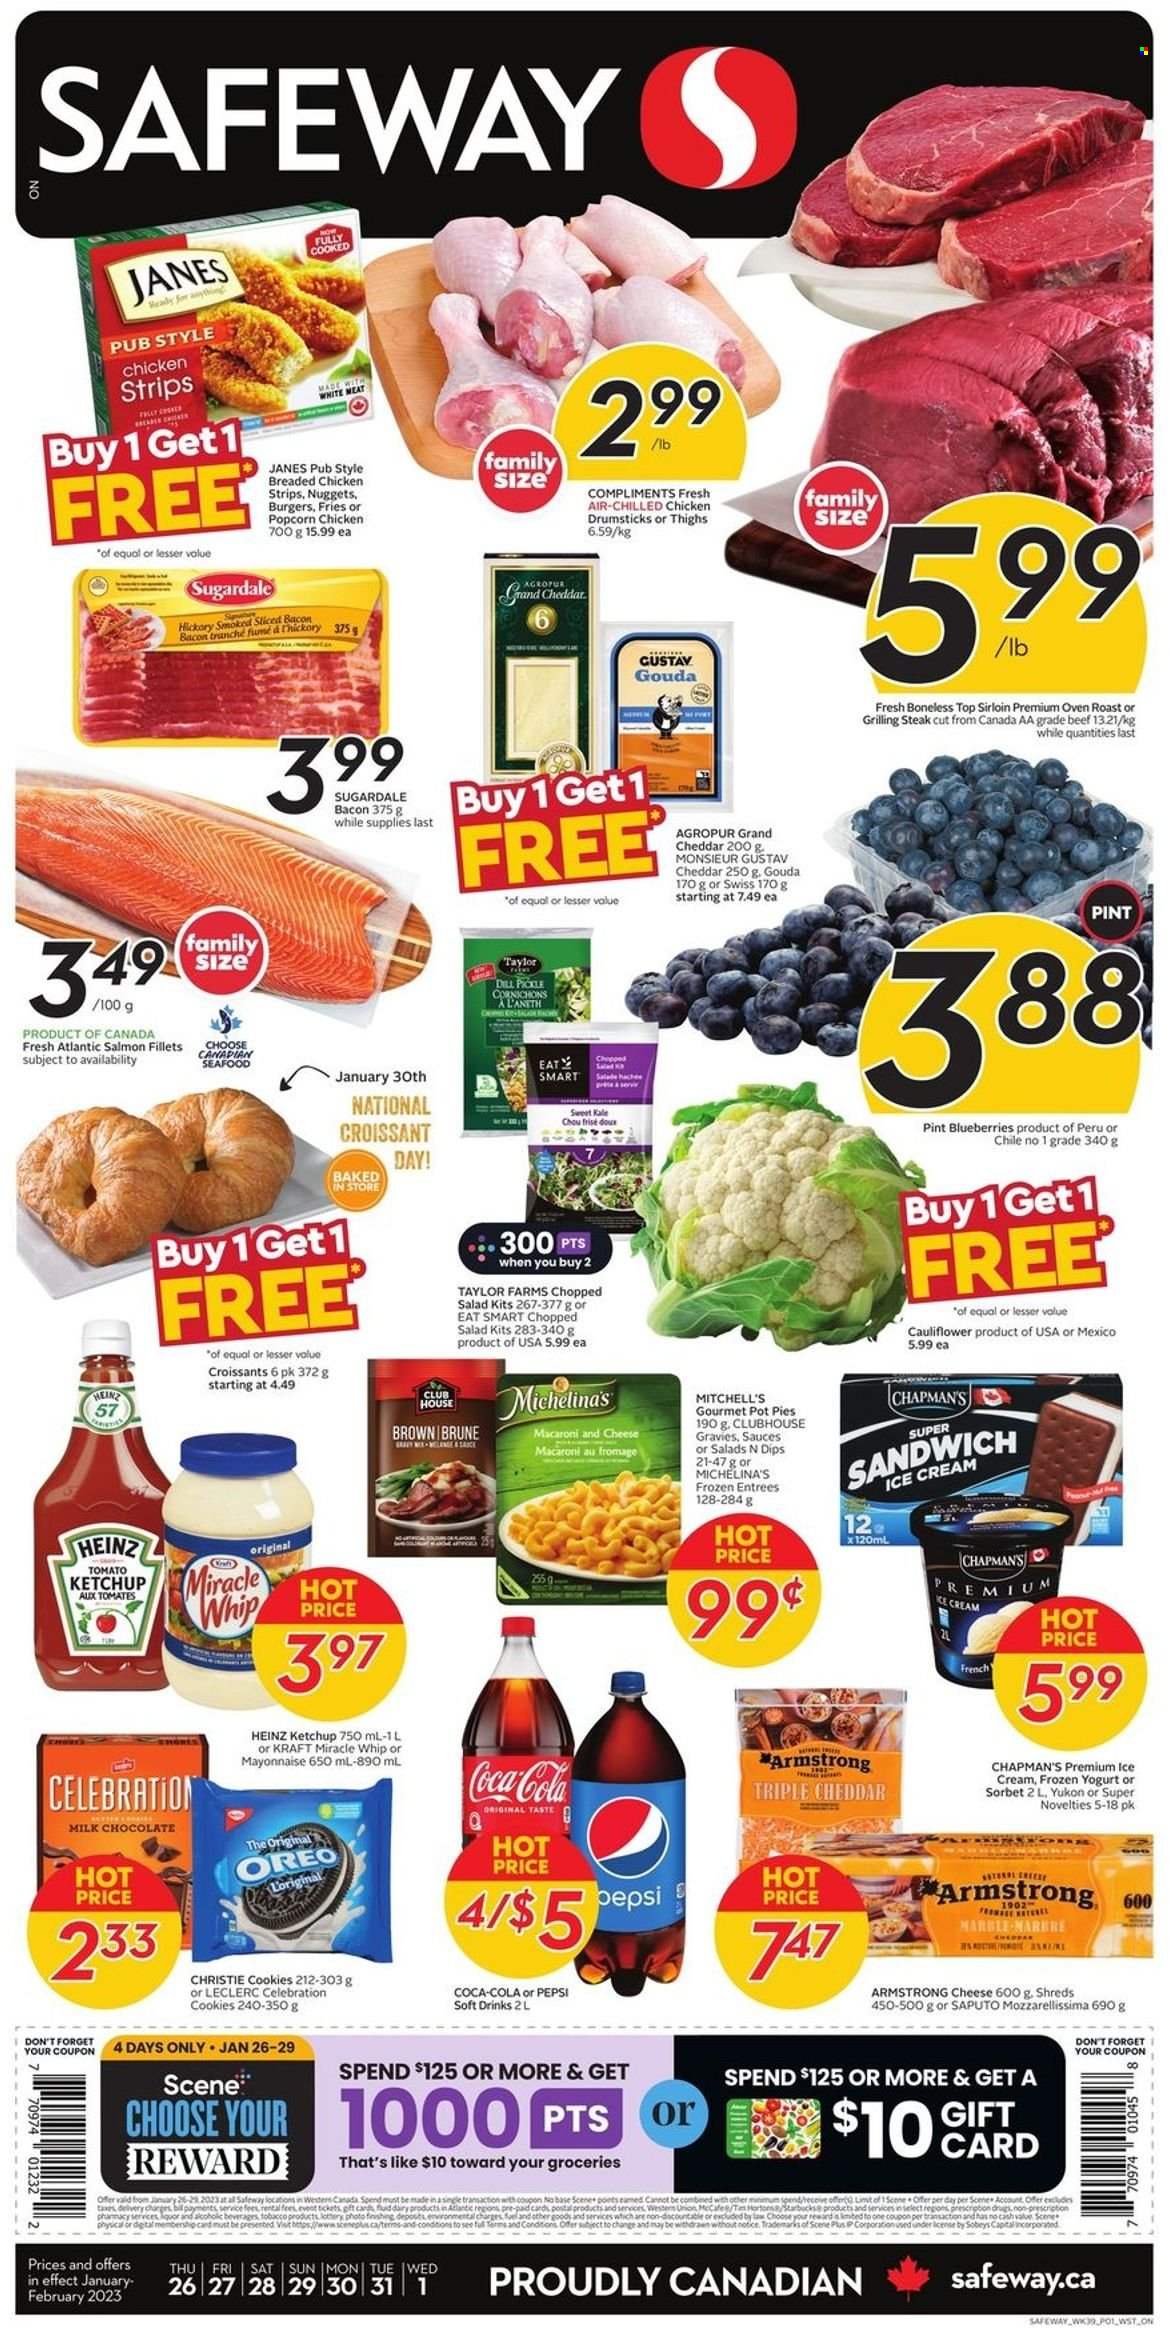 thumbnail - Safeway Flyer - January 26, 2023 - February 01, 2023 - Sales products - croissant, pot pie, cauliflower, kale, salad, chopped salad, salmon, salmon fillet, seafood, macaroni & cheese, sandwich, nuggets, hamburger, fried chicken, Kraft®, Sugardale, bacon, gouda, cheddar, yoghurt, mayonnaise, Miracle Whip, ice cream, strips, chicken strips, potato fries, cookies, milk chocolate, Celebration, dill pickle, popcorn, dill, Coca-Cola, Pepsi, soft drink, liquor, chicken drumsticks, chicken, Heinz, ketchup, Oreo, steak. Page 1.